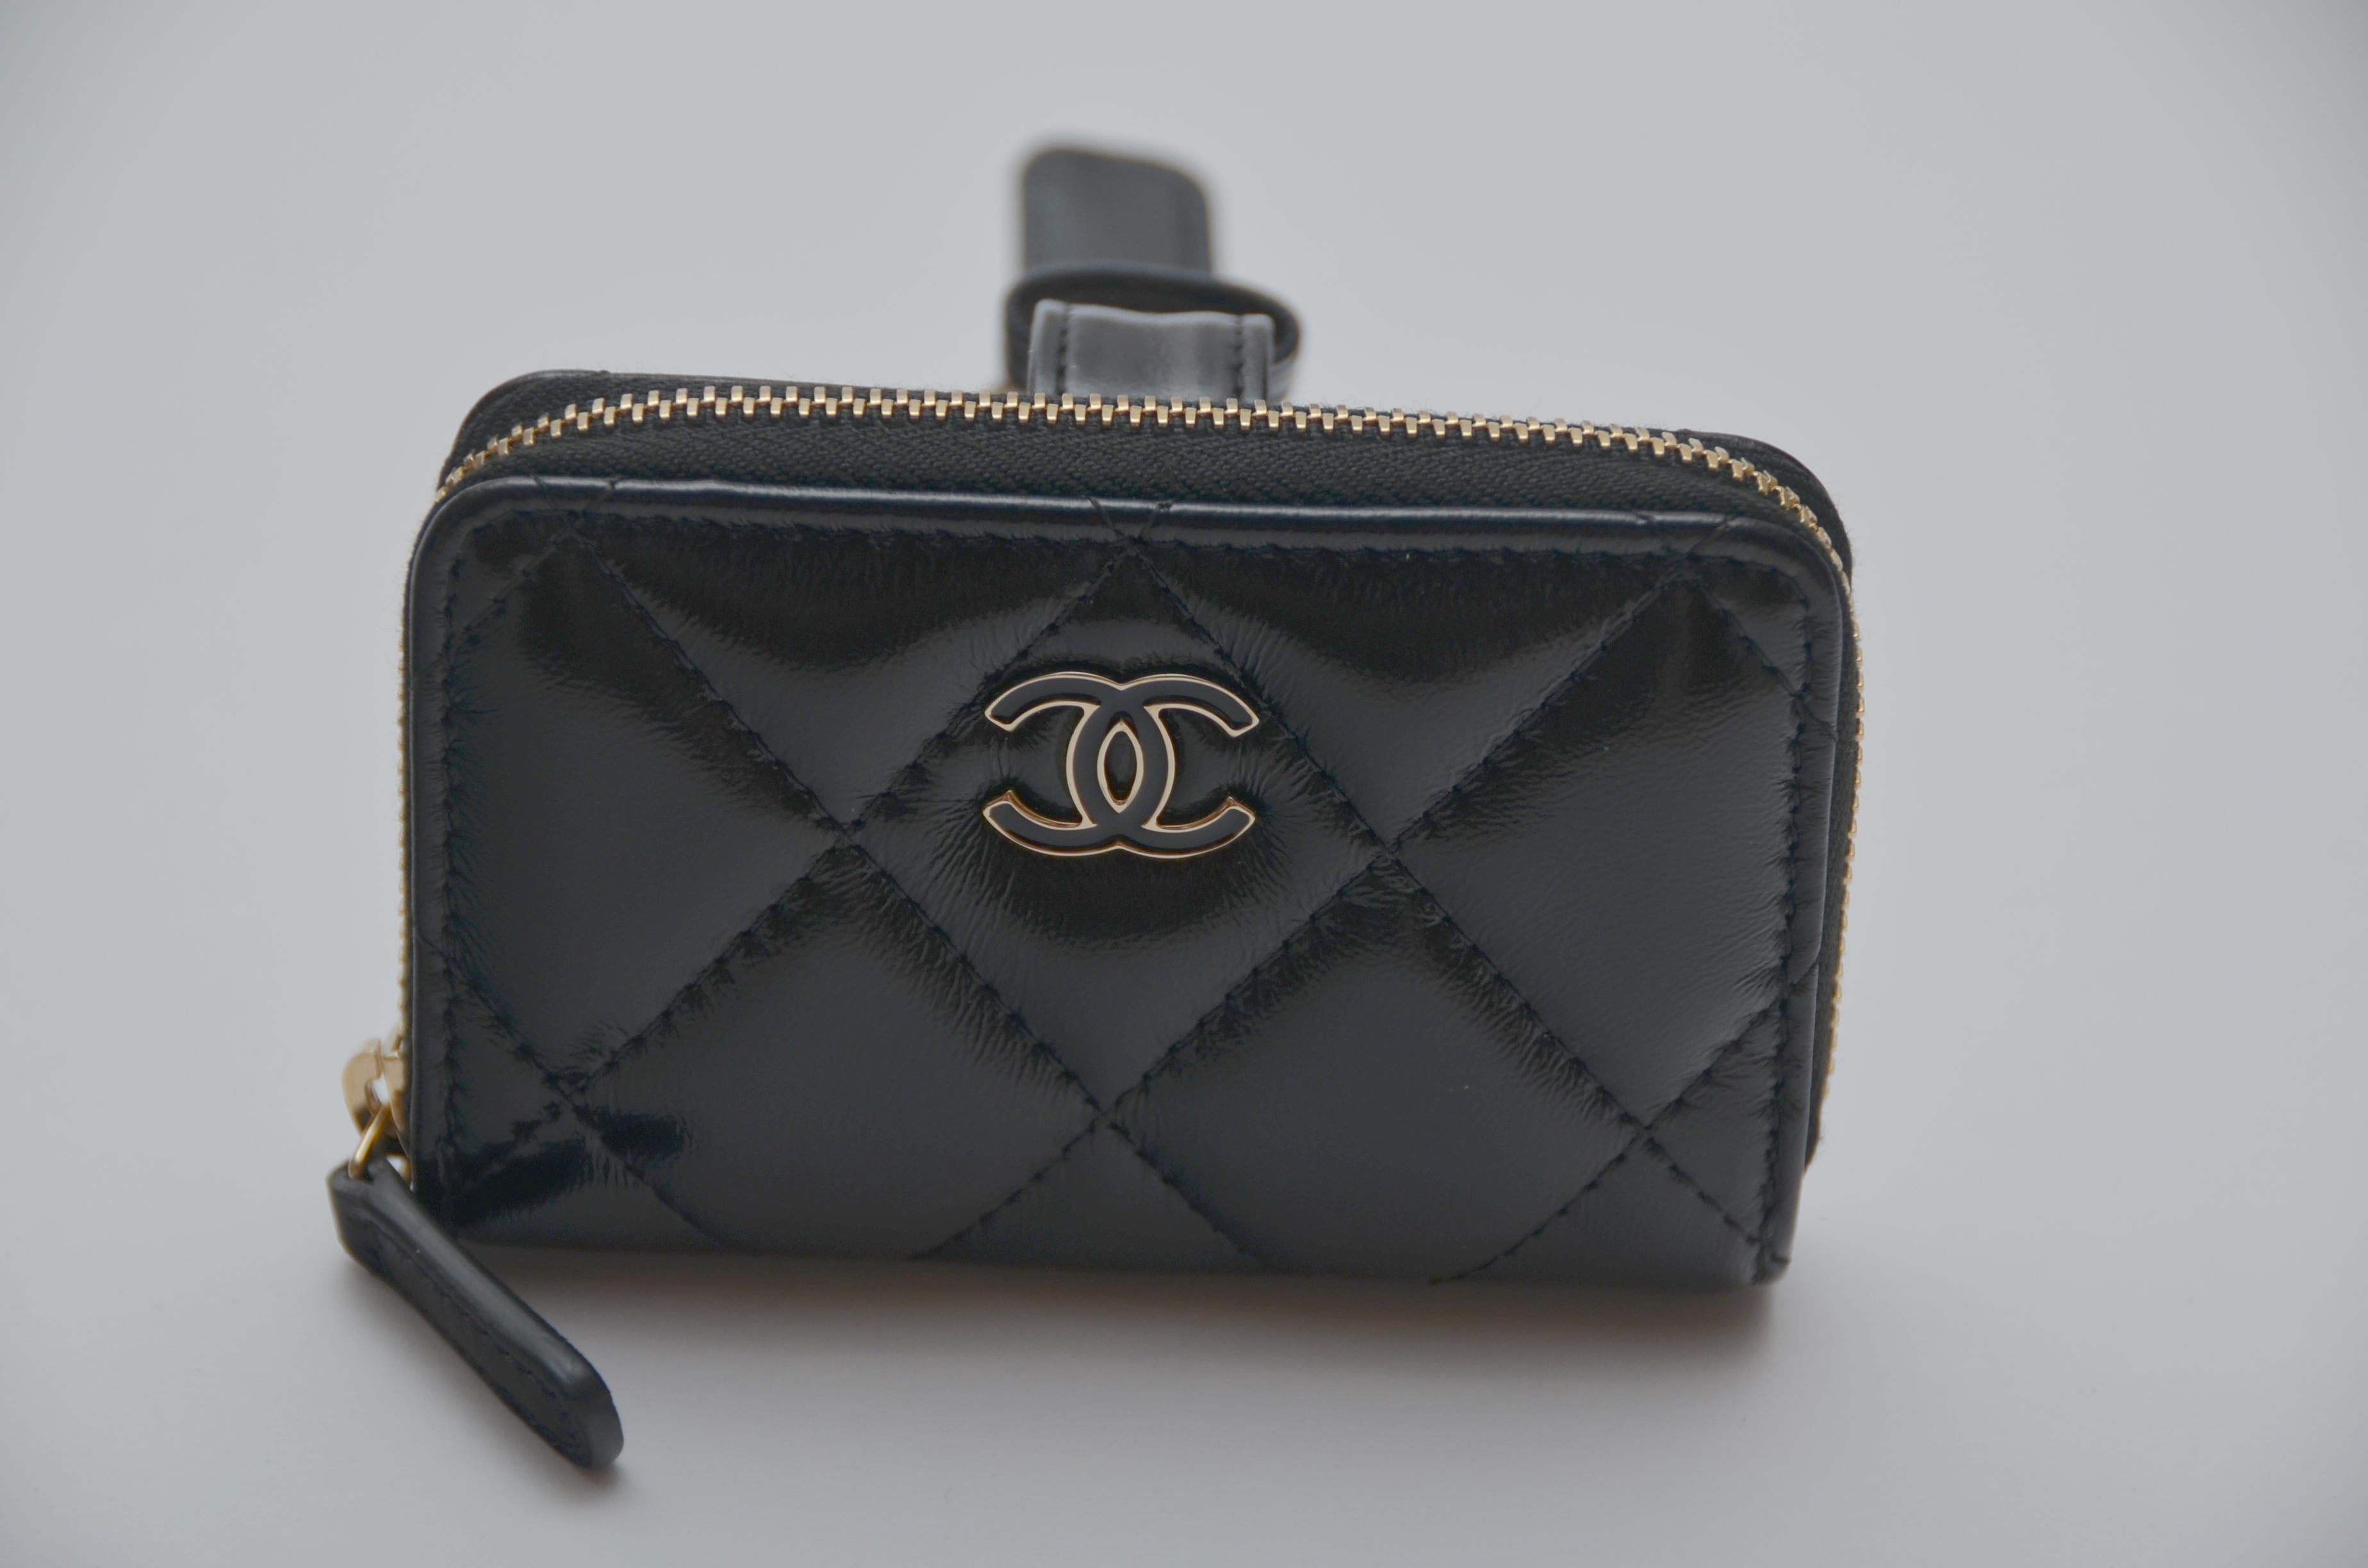 100% authentic guaranteed CHANEL MINI Flap  Purse Wristlet Bracelet  
Shiny Black Leather  
NEW with card, tags ,clear plastic on, Chanel  box and dust-bag.
Receipt available to buyer on request

Final Sale